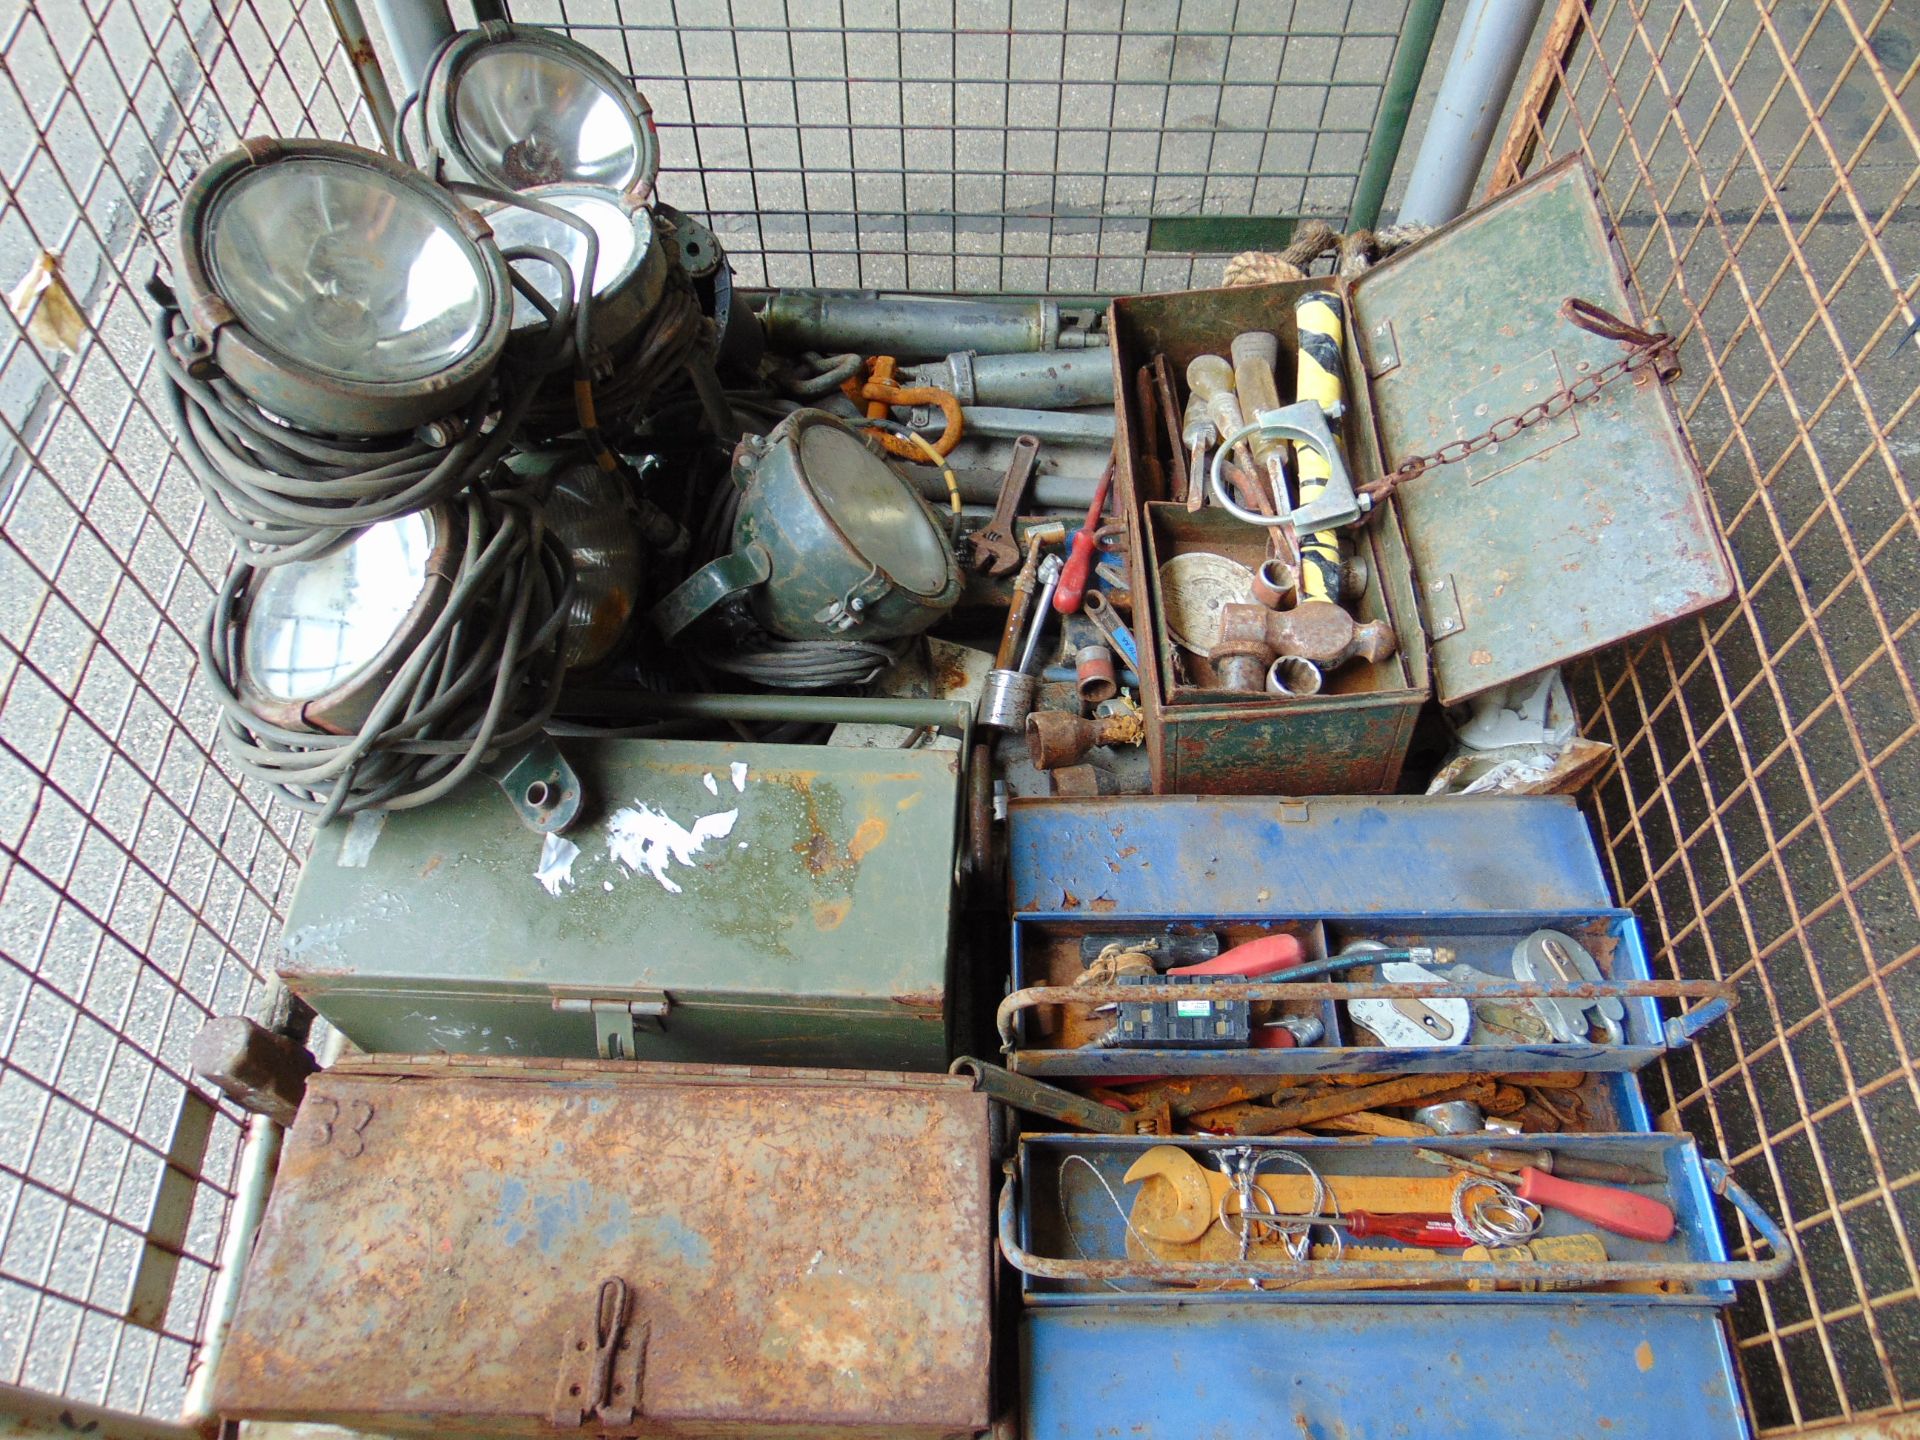 Mixed Stillage of Tools, Tool Boxes, FV Search Lights etc